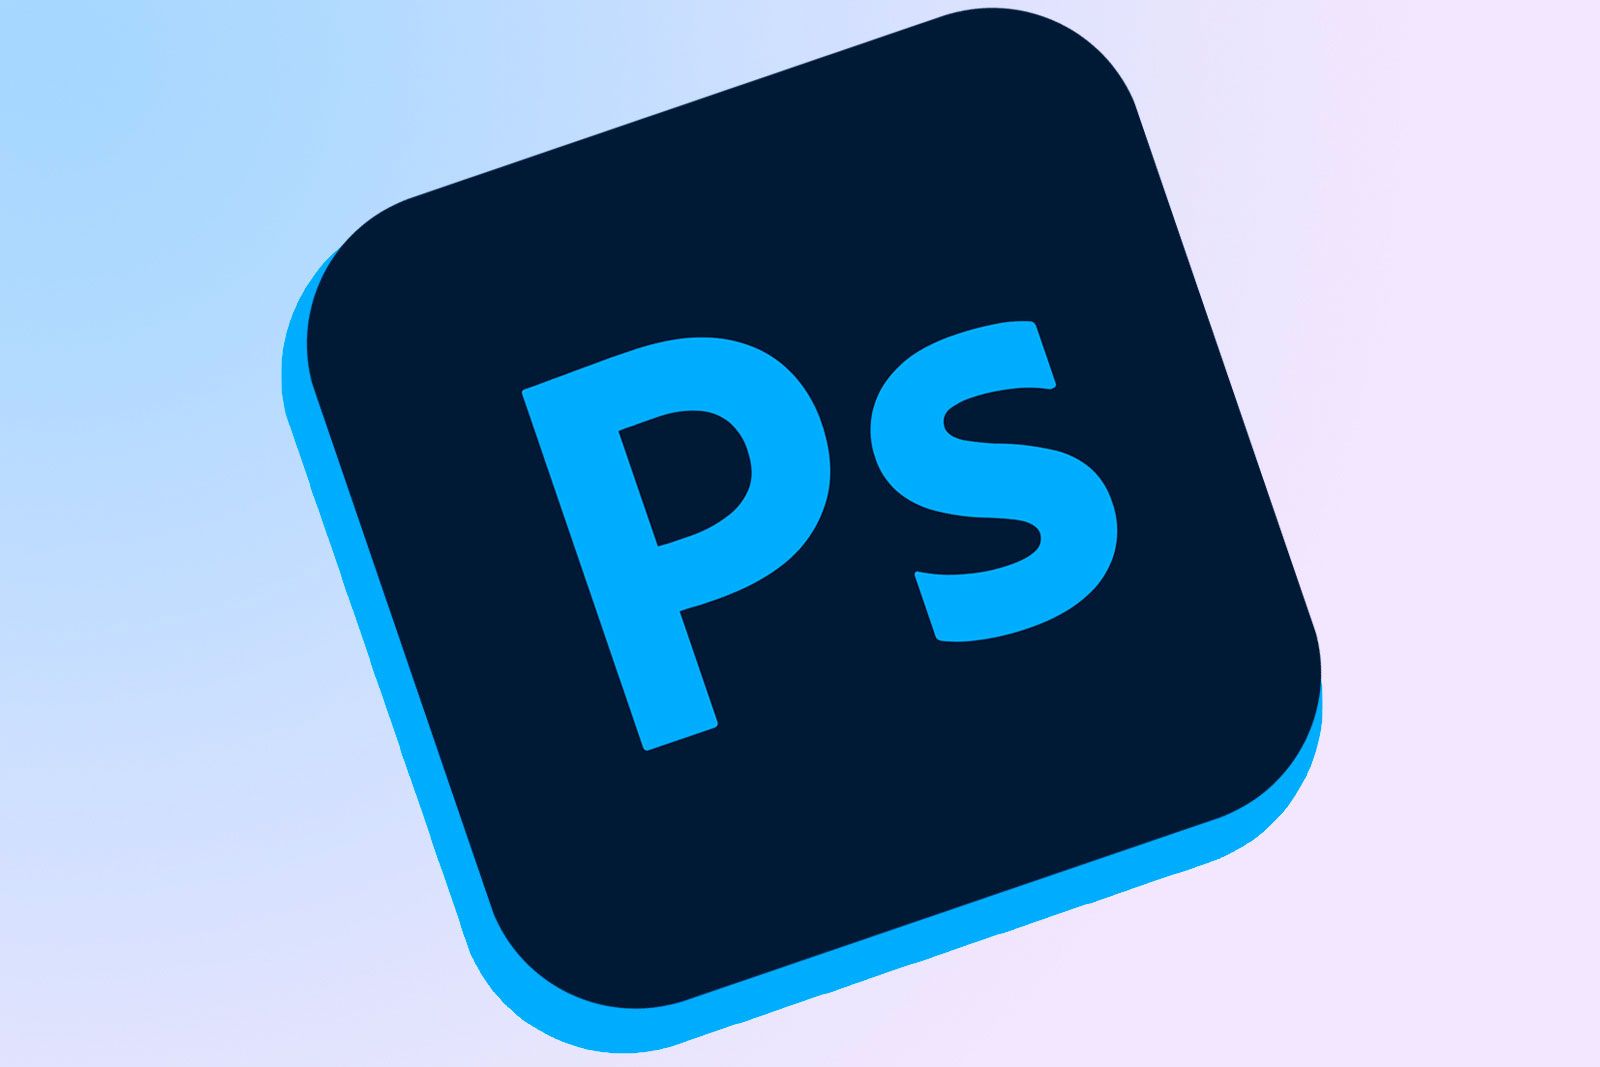 https://www.pocket-lint.com/master-the-art-of-photoshop-without-going-broke-thanks-to-this-30-course/The Complete Photoshop Master Class Bundle